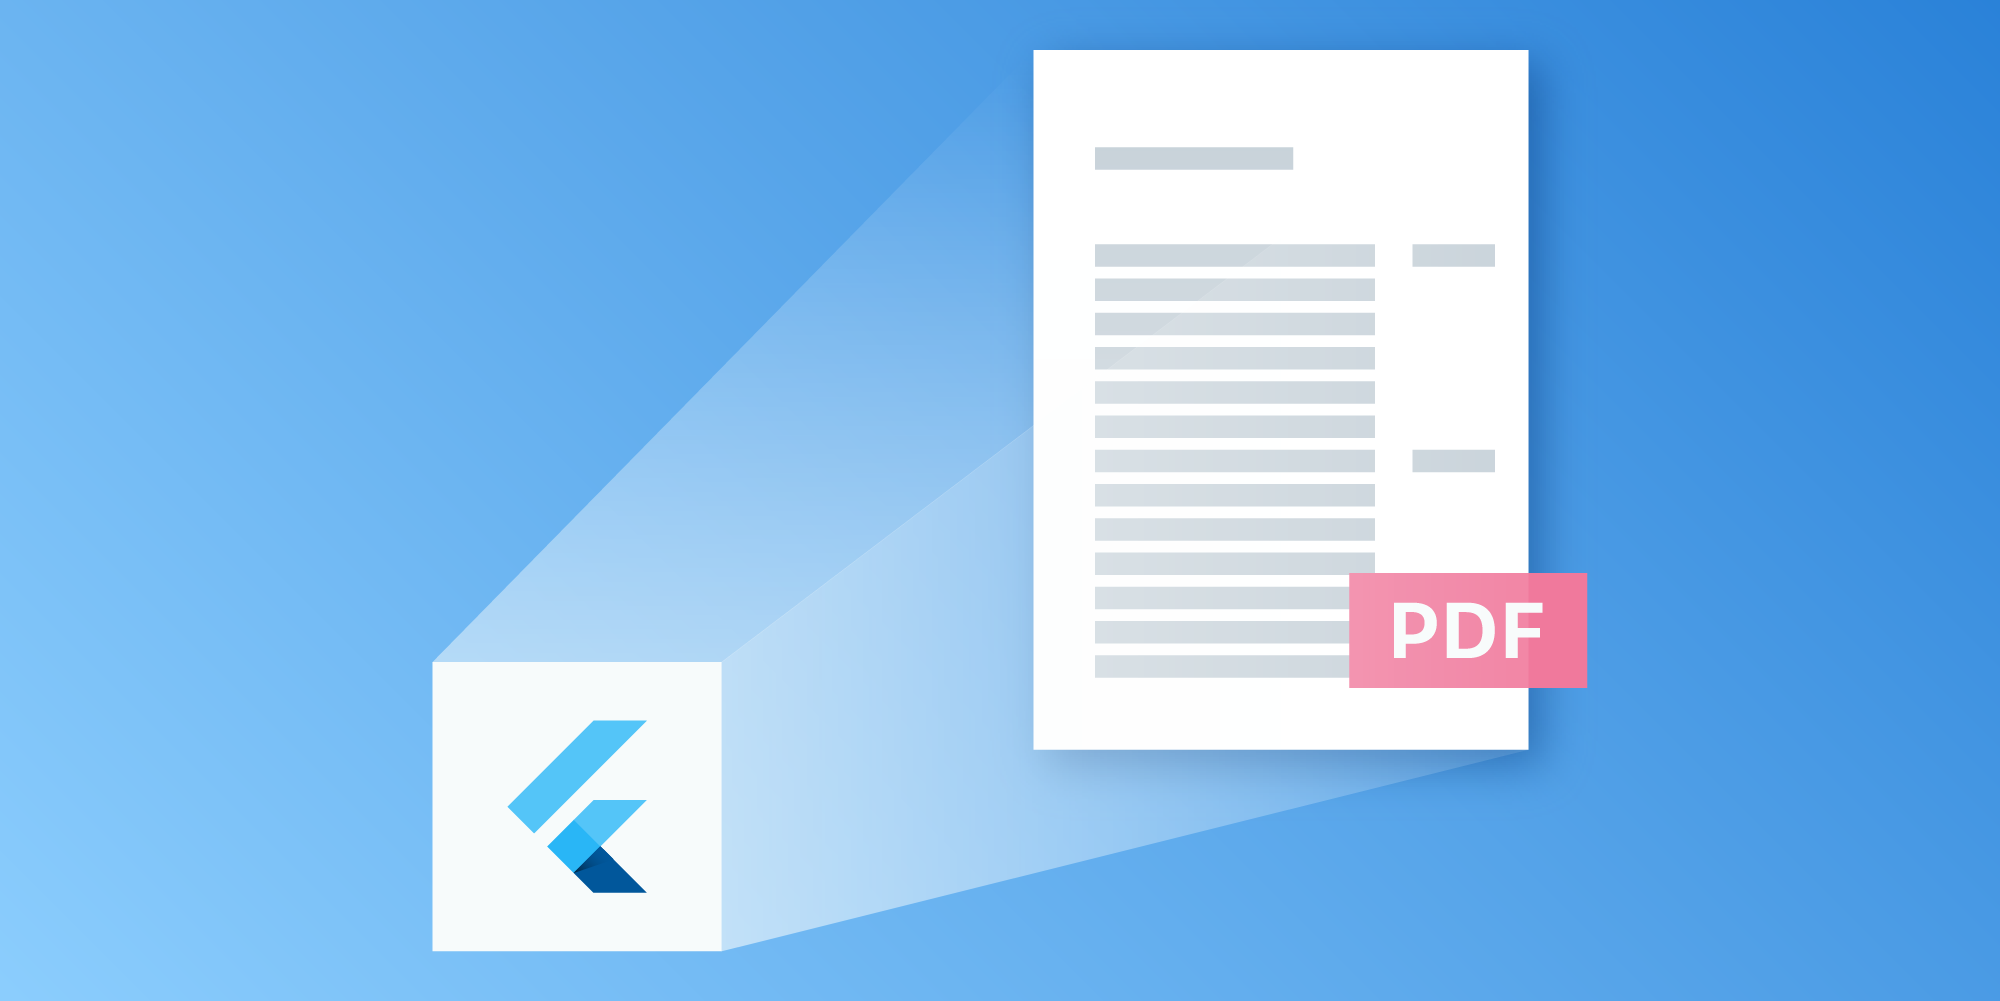 Illustration: How to Open a PDF in Flutter Using advance_pdf_viewer2